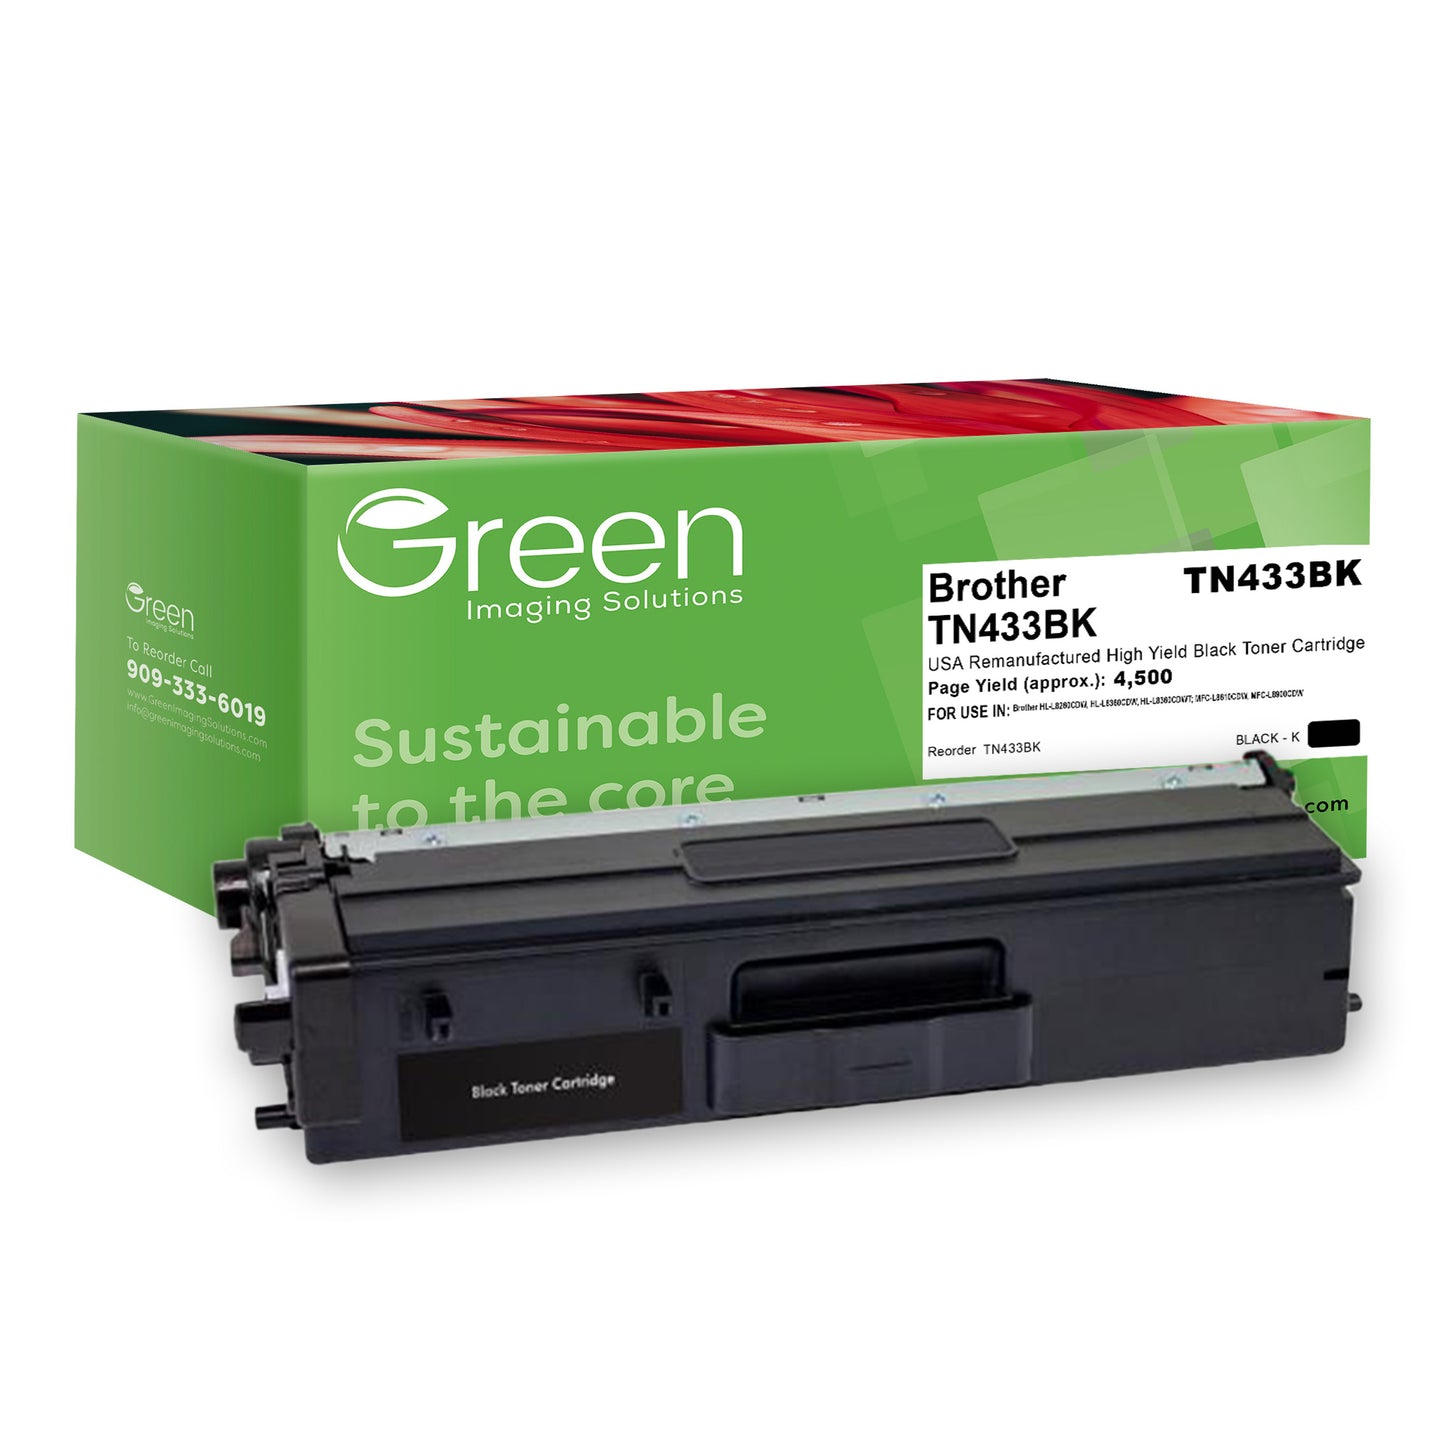 Green Imaging Solutions USA Remanufactured High Yield Black Toner Cartridge for Brother TN433BK